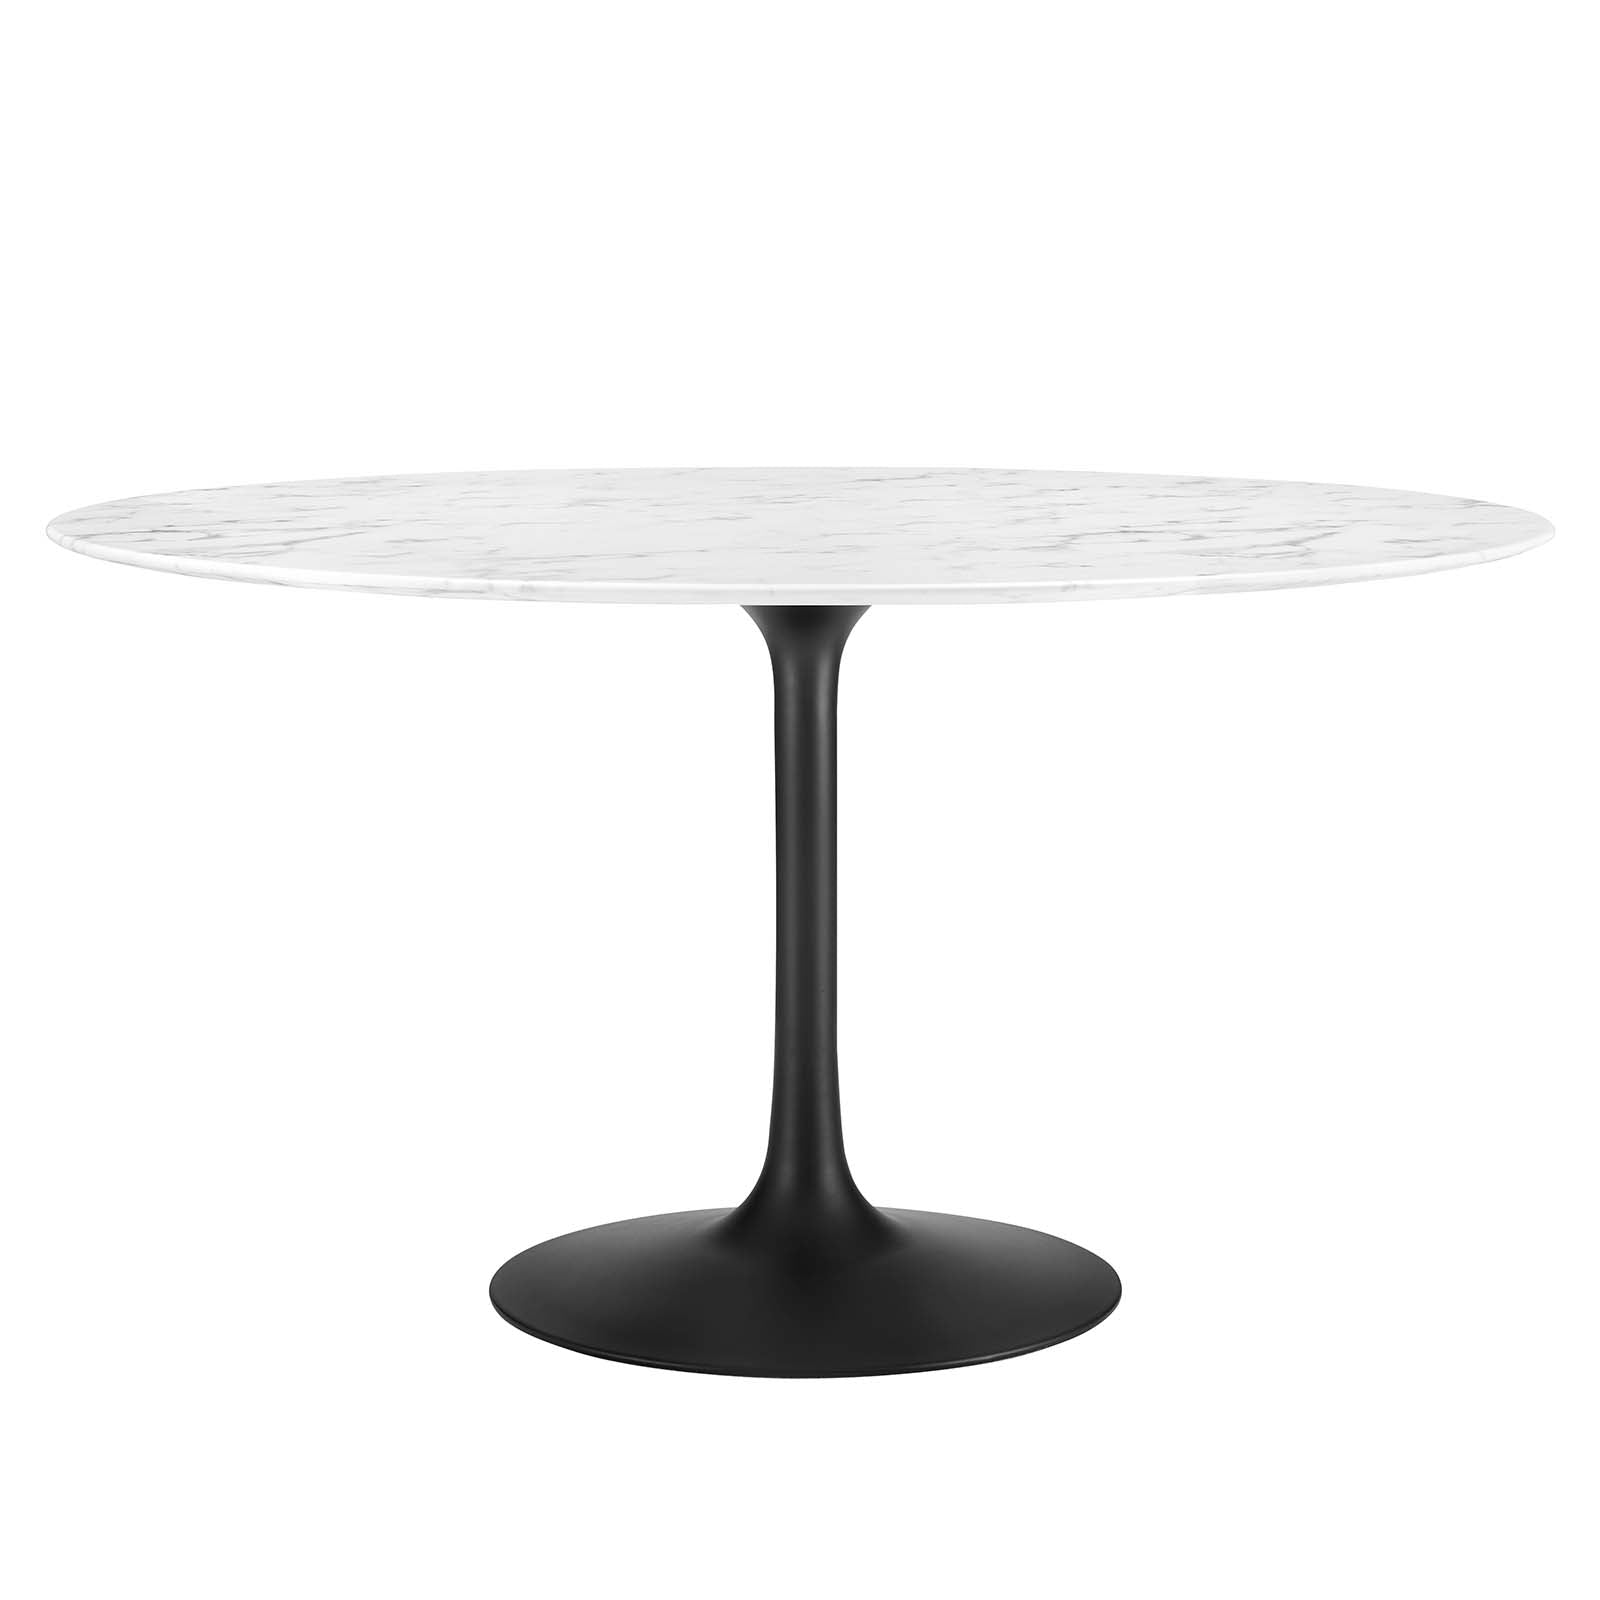 Lippa 54" Round Artificial Marble Dining Table - East Shore Modern Home Furnishings